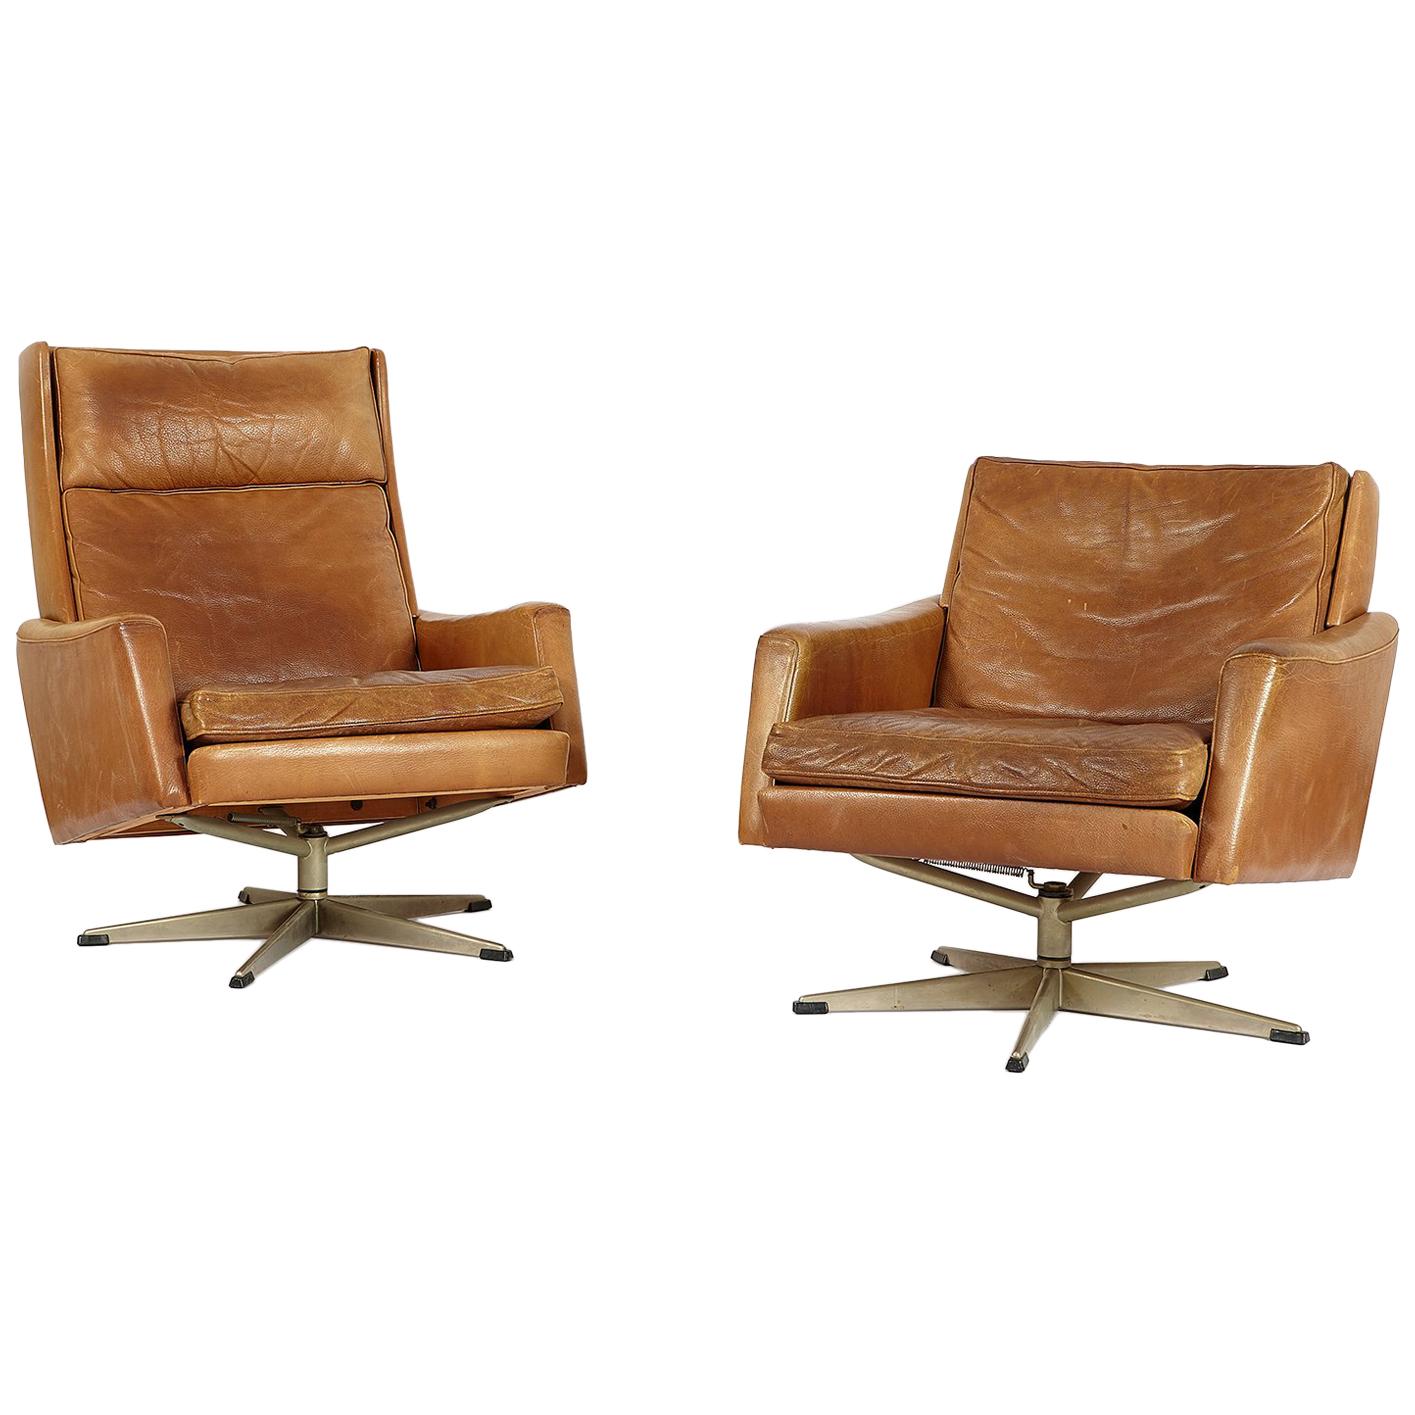 Set of Two Midcentury Leather Chairs, Denmark 1960s